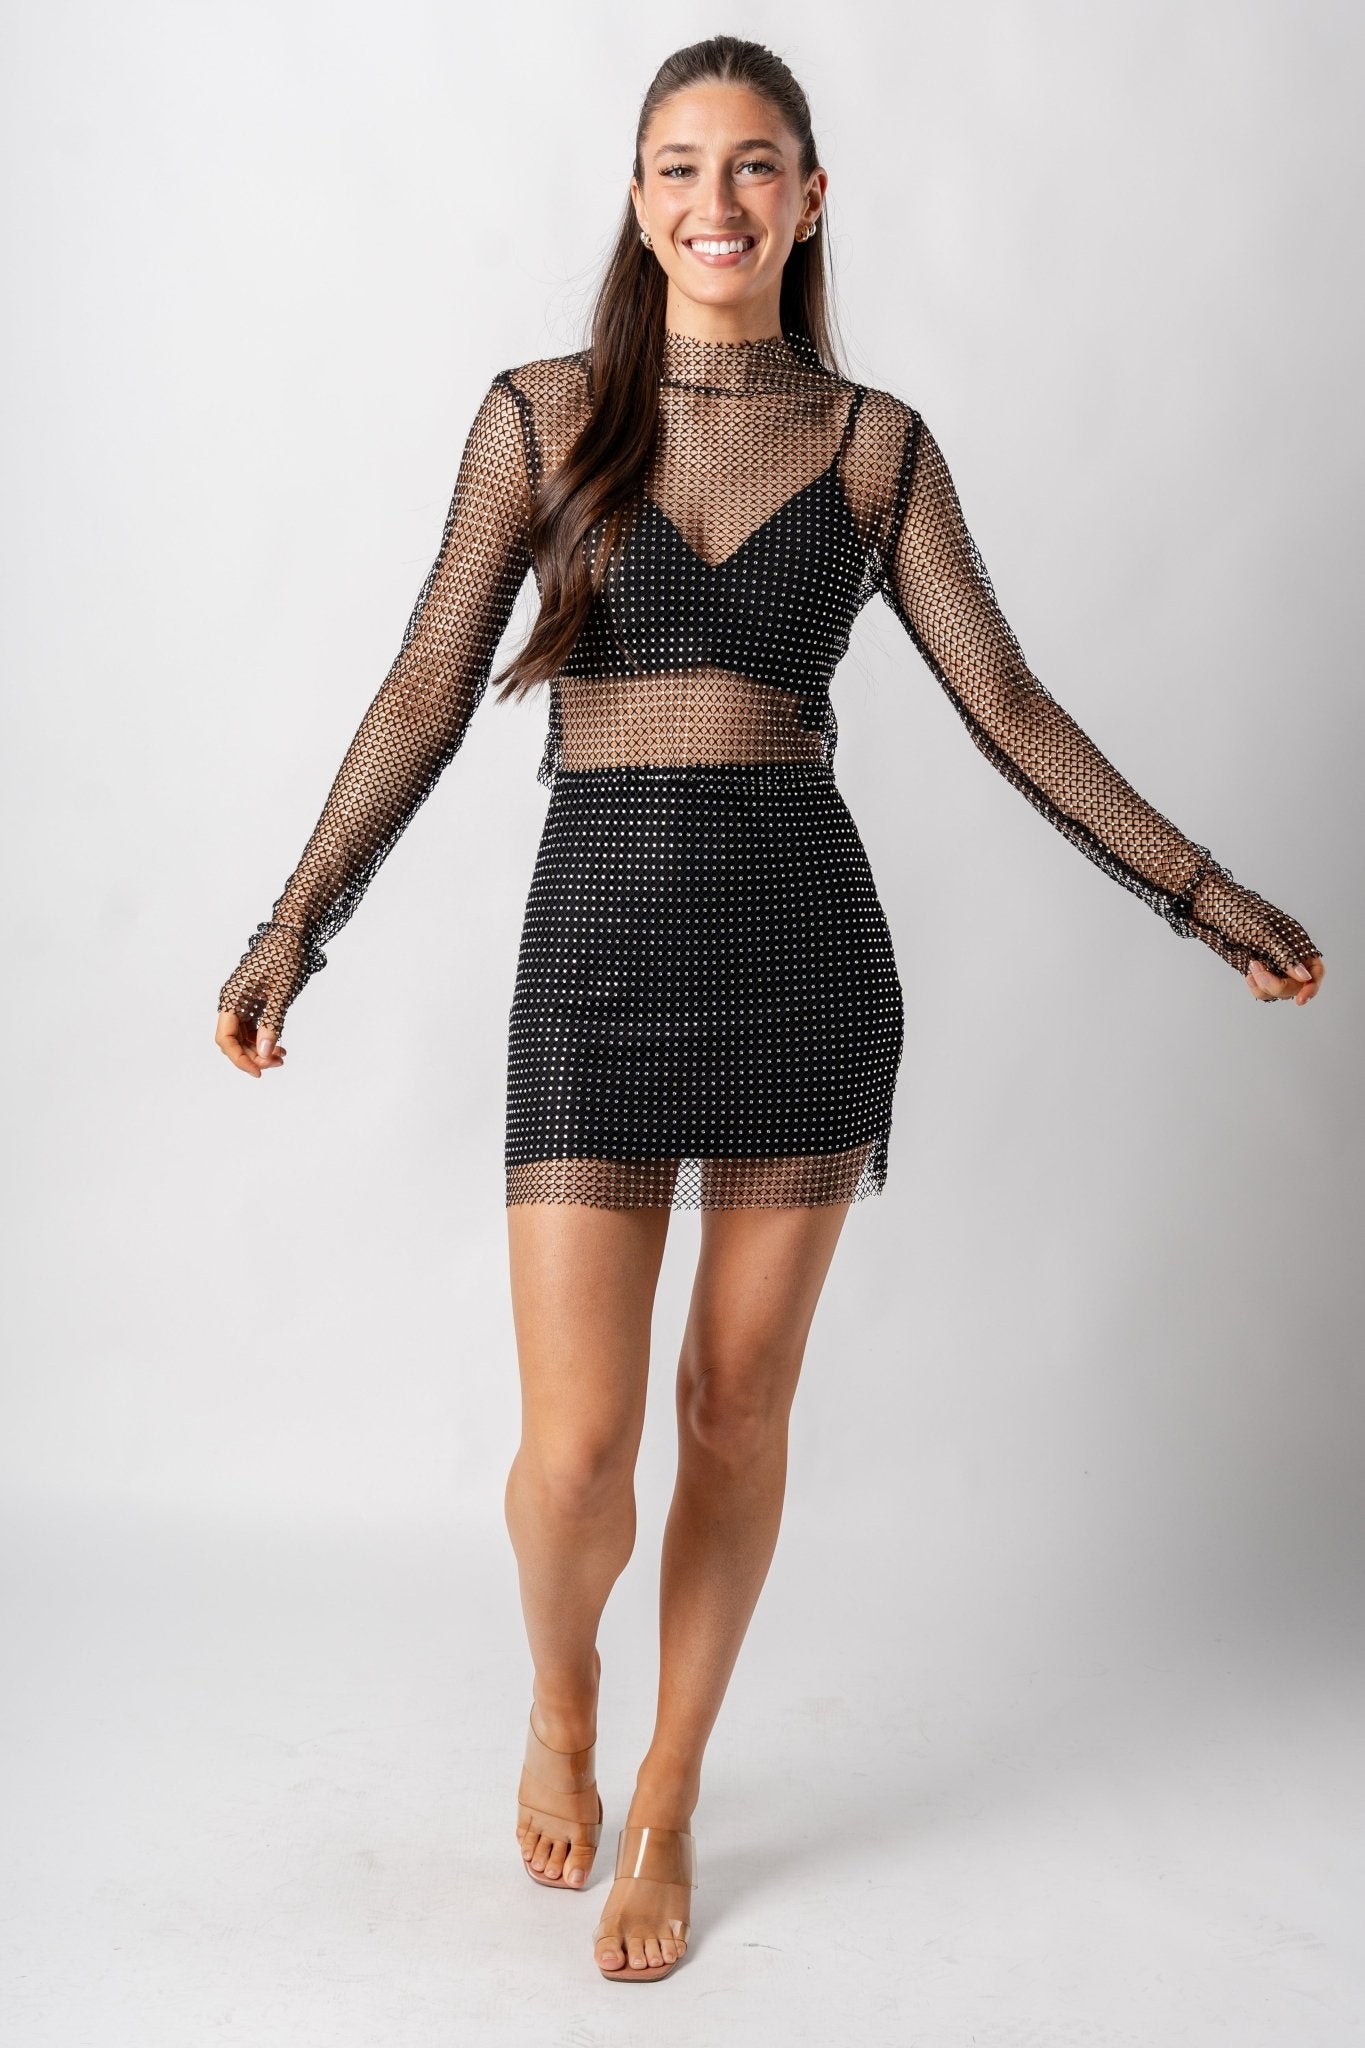 Crystal fishnet mini skirt black - Affordable New Year's Eve Party Outfits at Lush Fashion Lounge Boutique in Oklahoma City